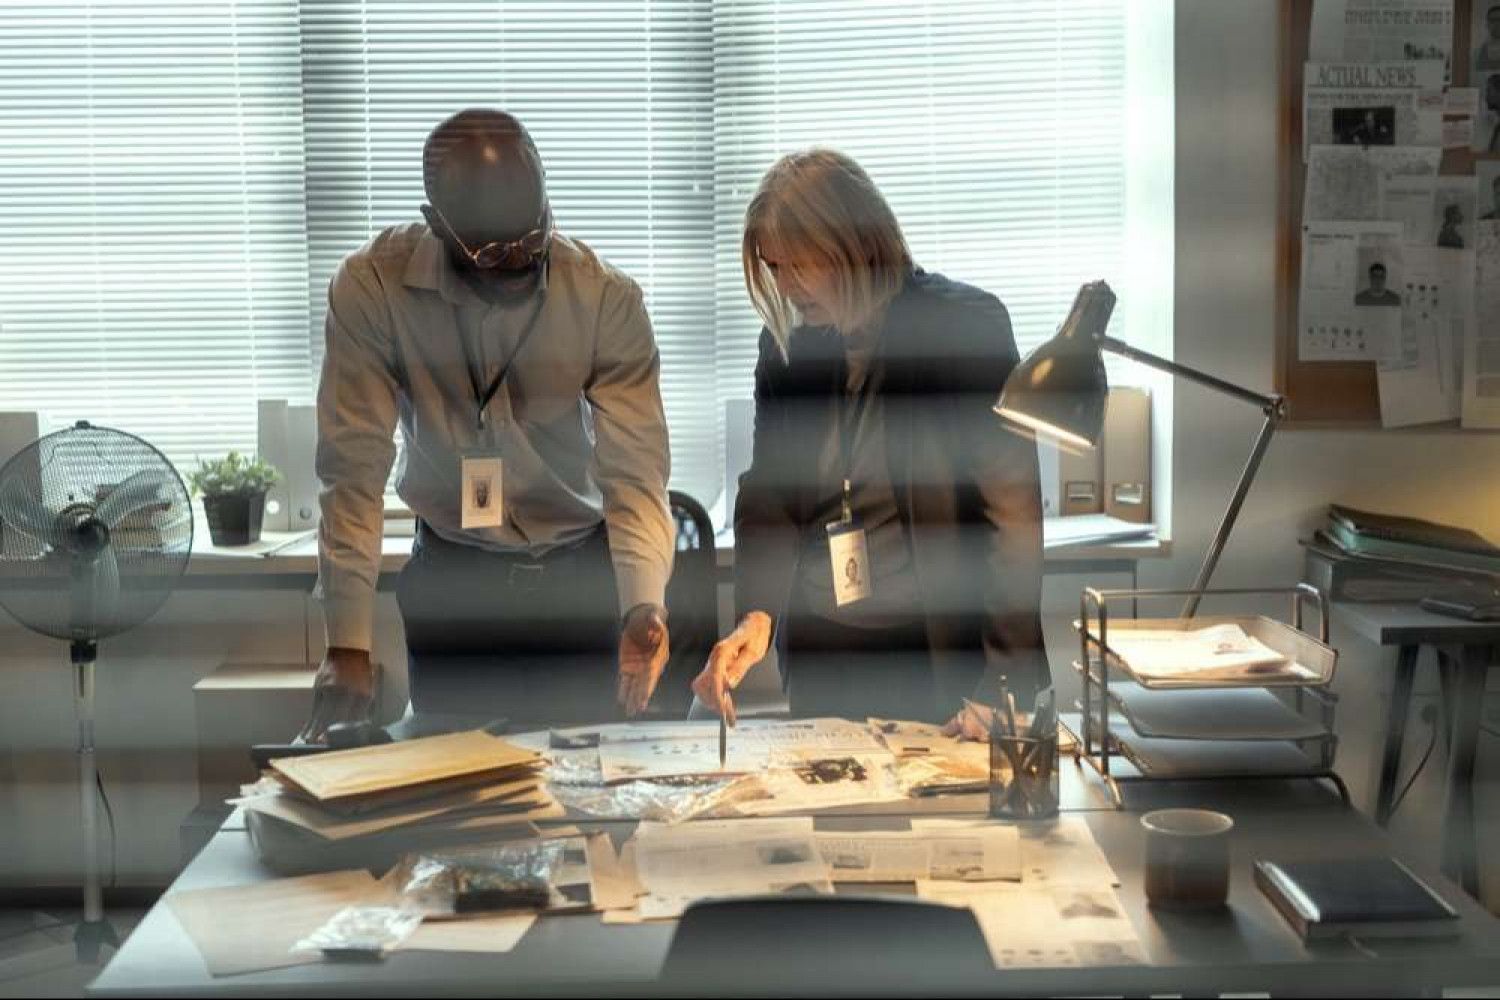 A man and a woman are standing at a desk looking at papers.